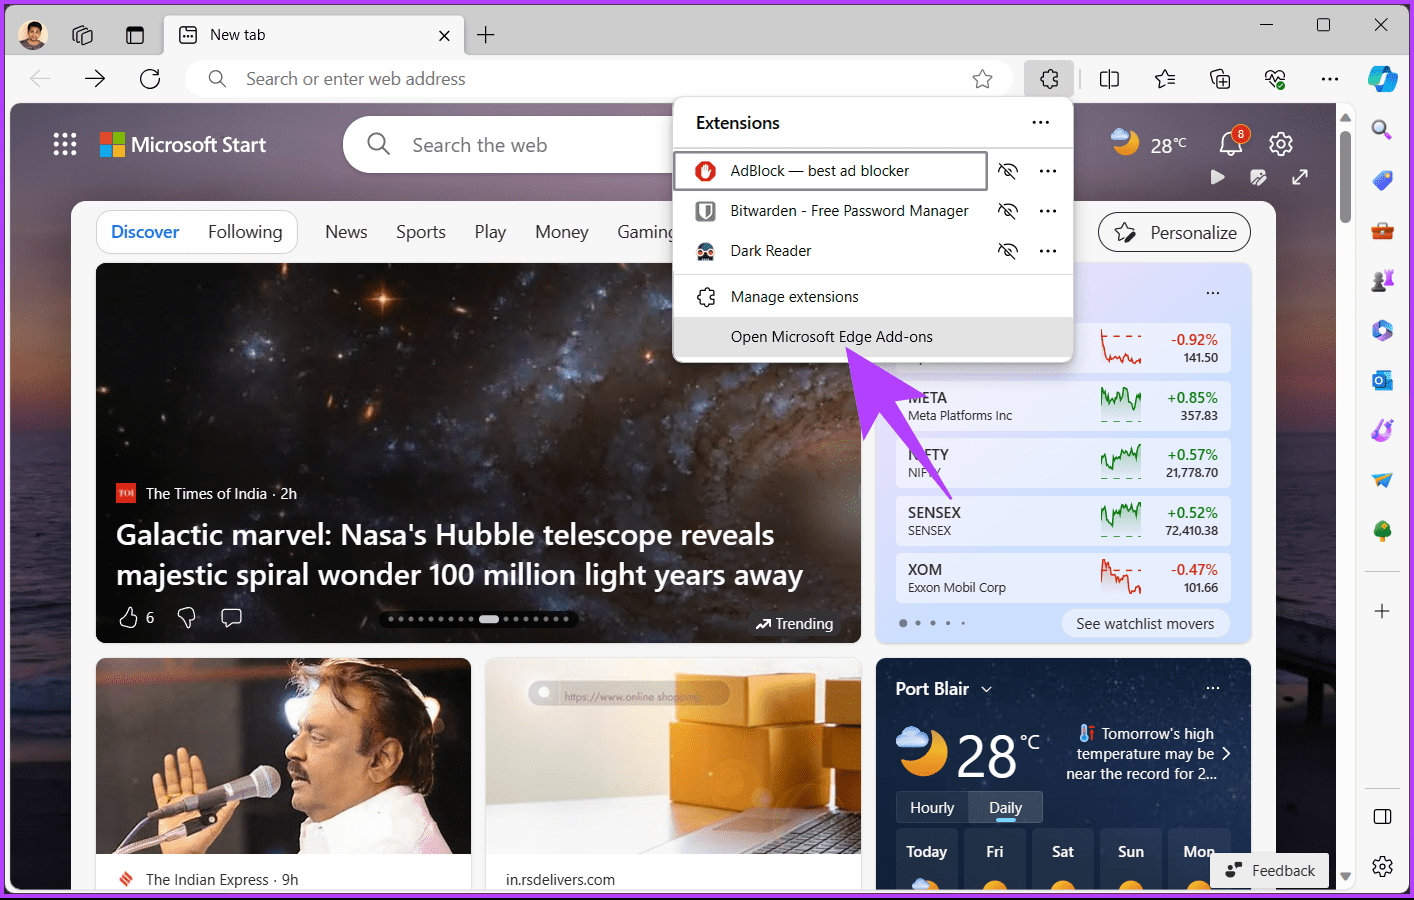 click on the 'Open Microsoft Edge Add-ons' option